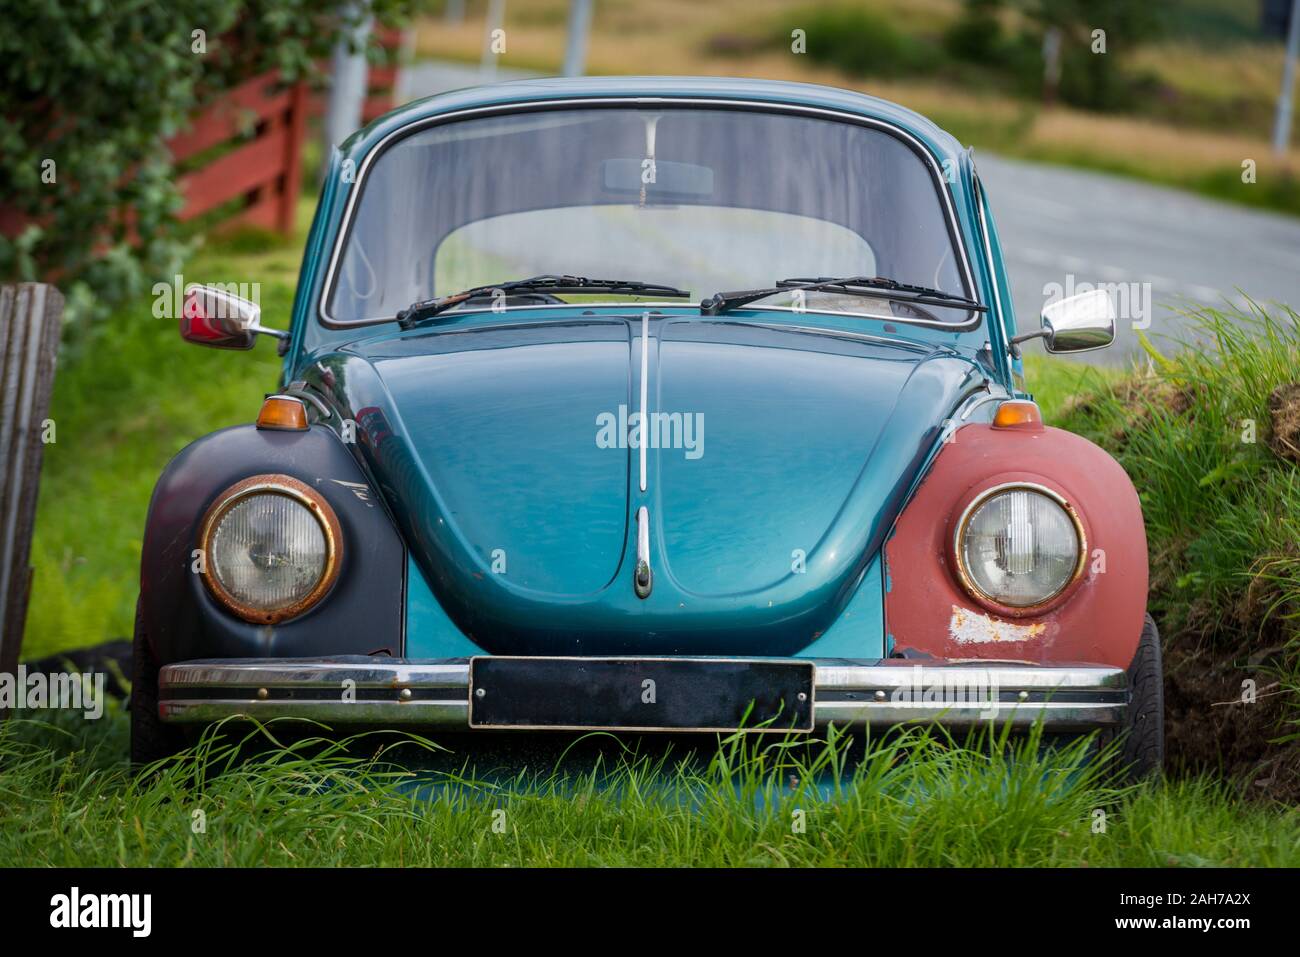 Front view of an old and battered light blue Volkswagen Beetle car, lying on the grass in a roadside junkyard Stock Photo